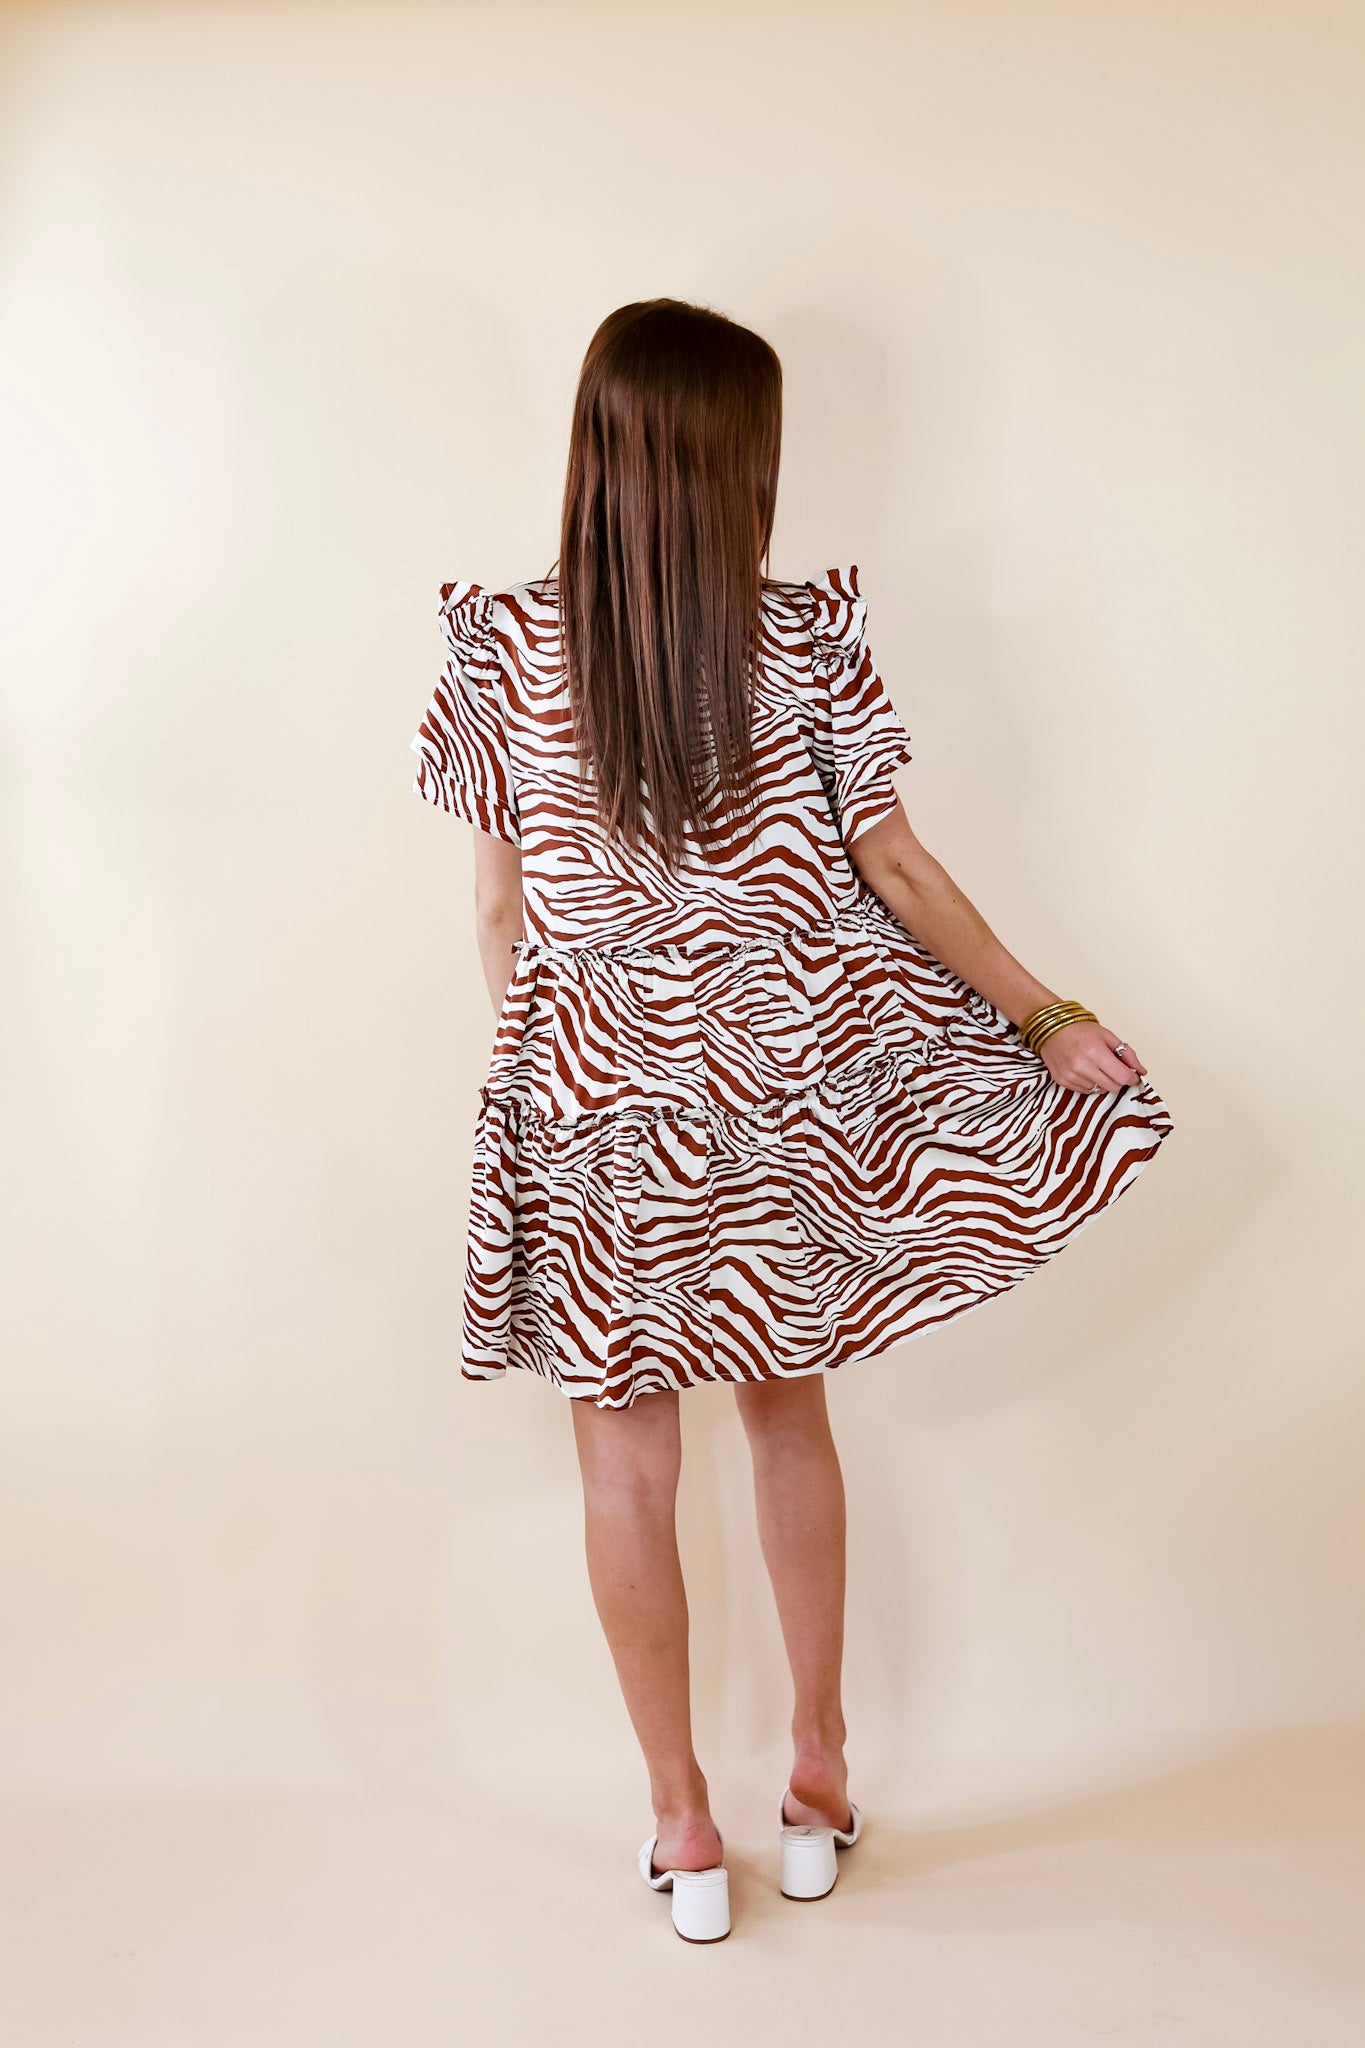 If You Dare Zebra Print Tiered Dress in Ginger Brown - Giddy Up Glamour Boutique